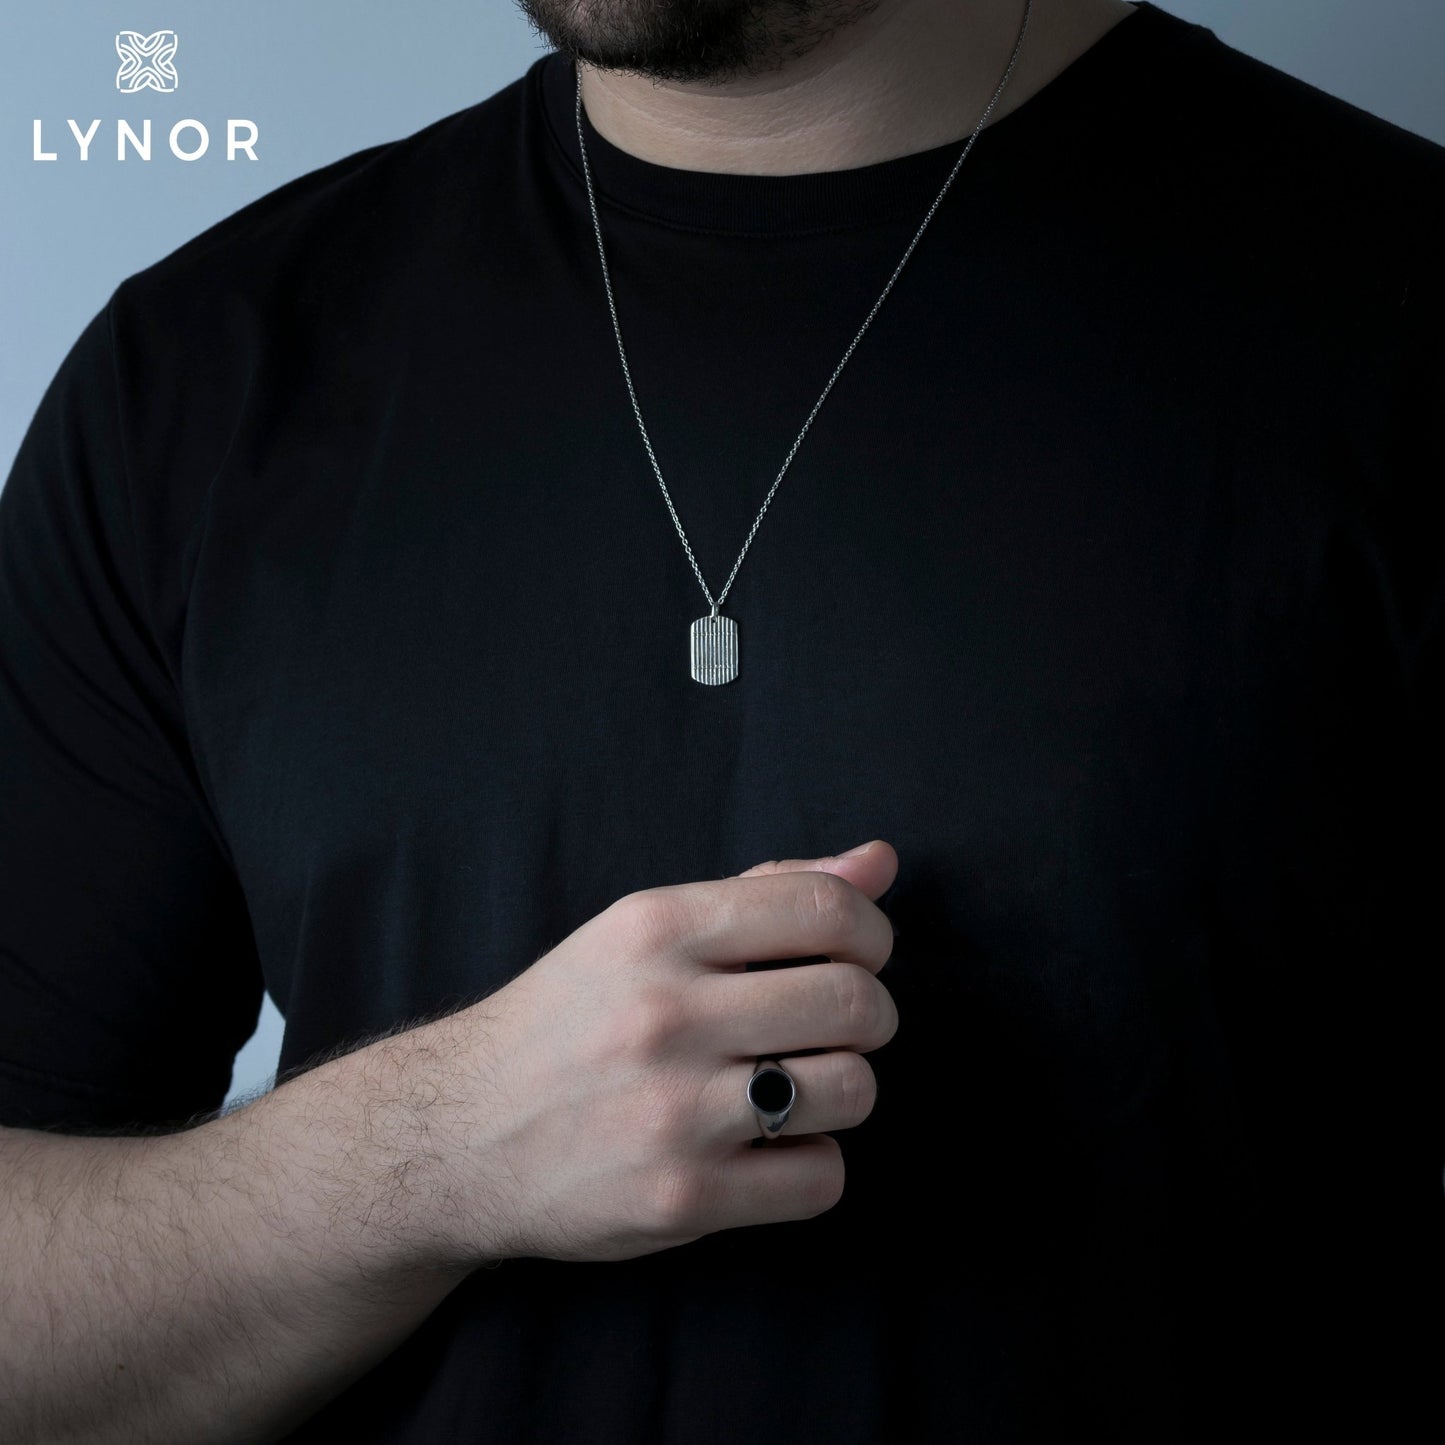 Edge Necklace, Platinum - for him - 18k Gold - Lynor